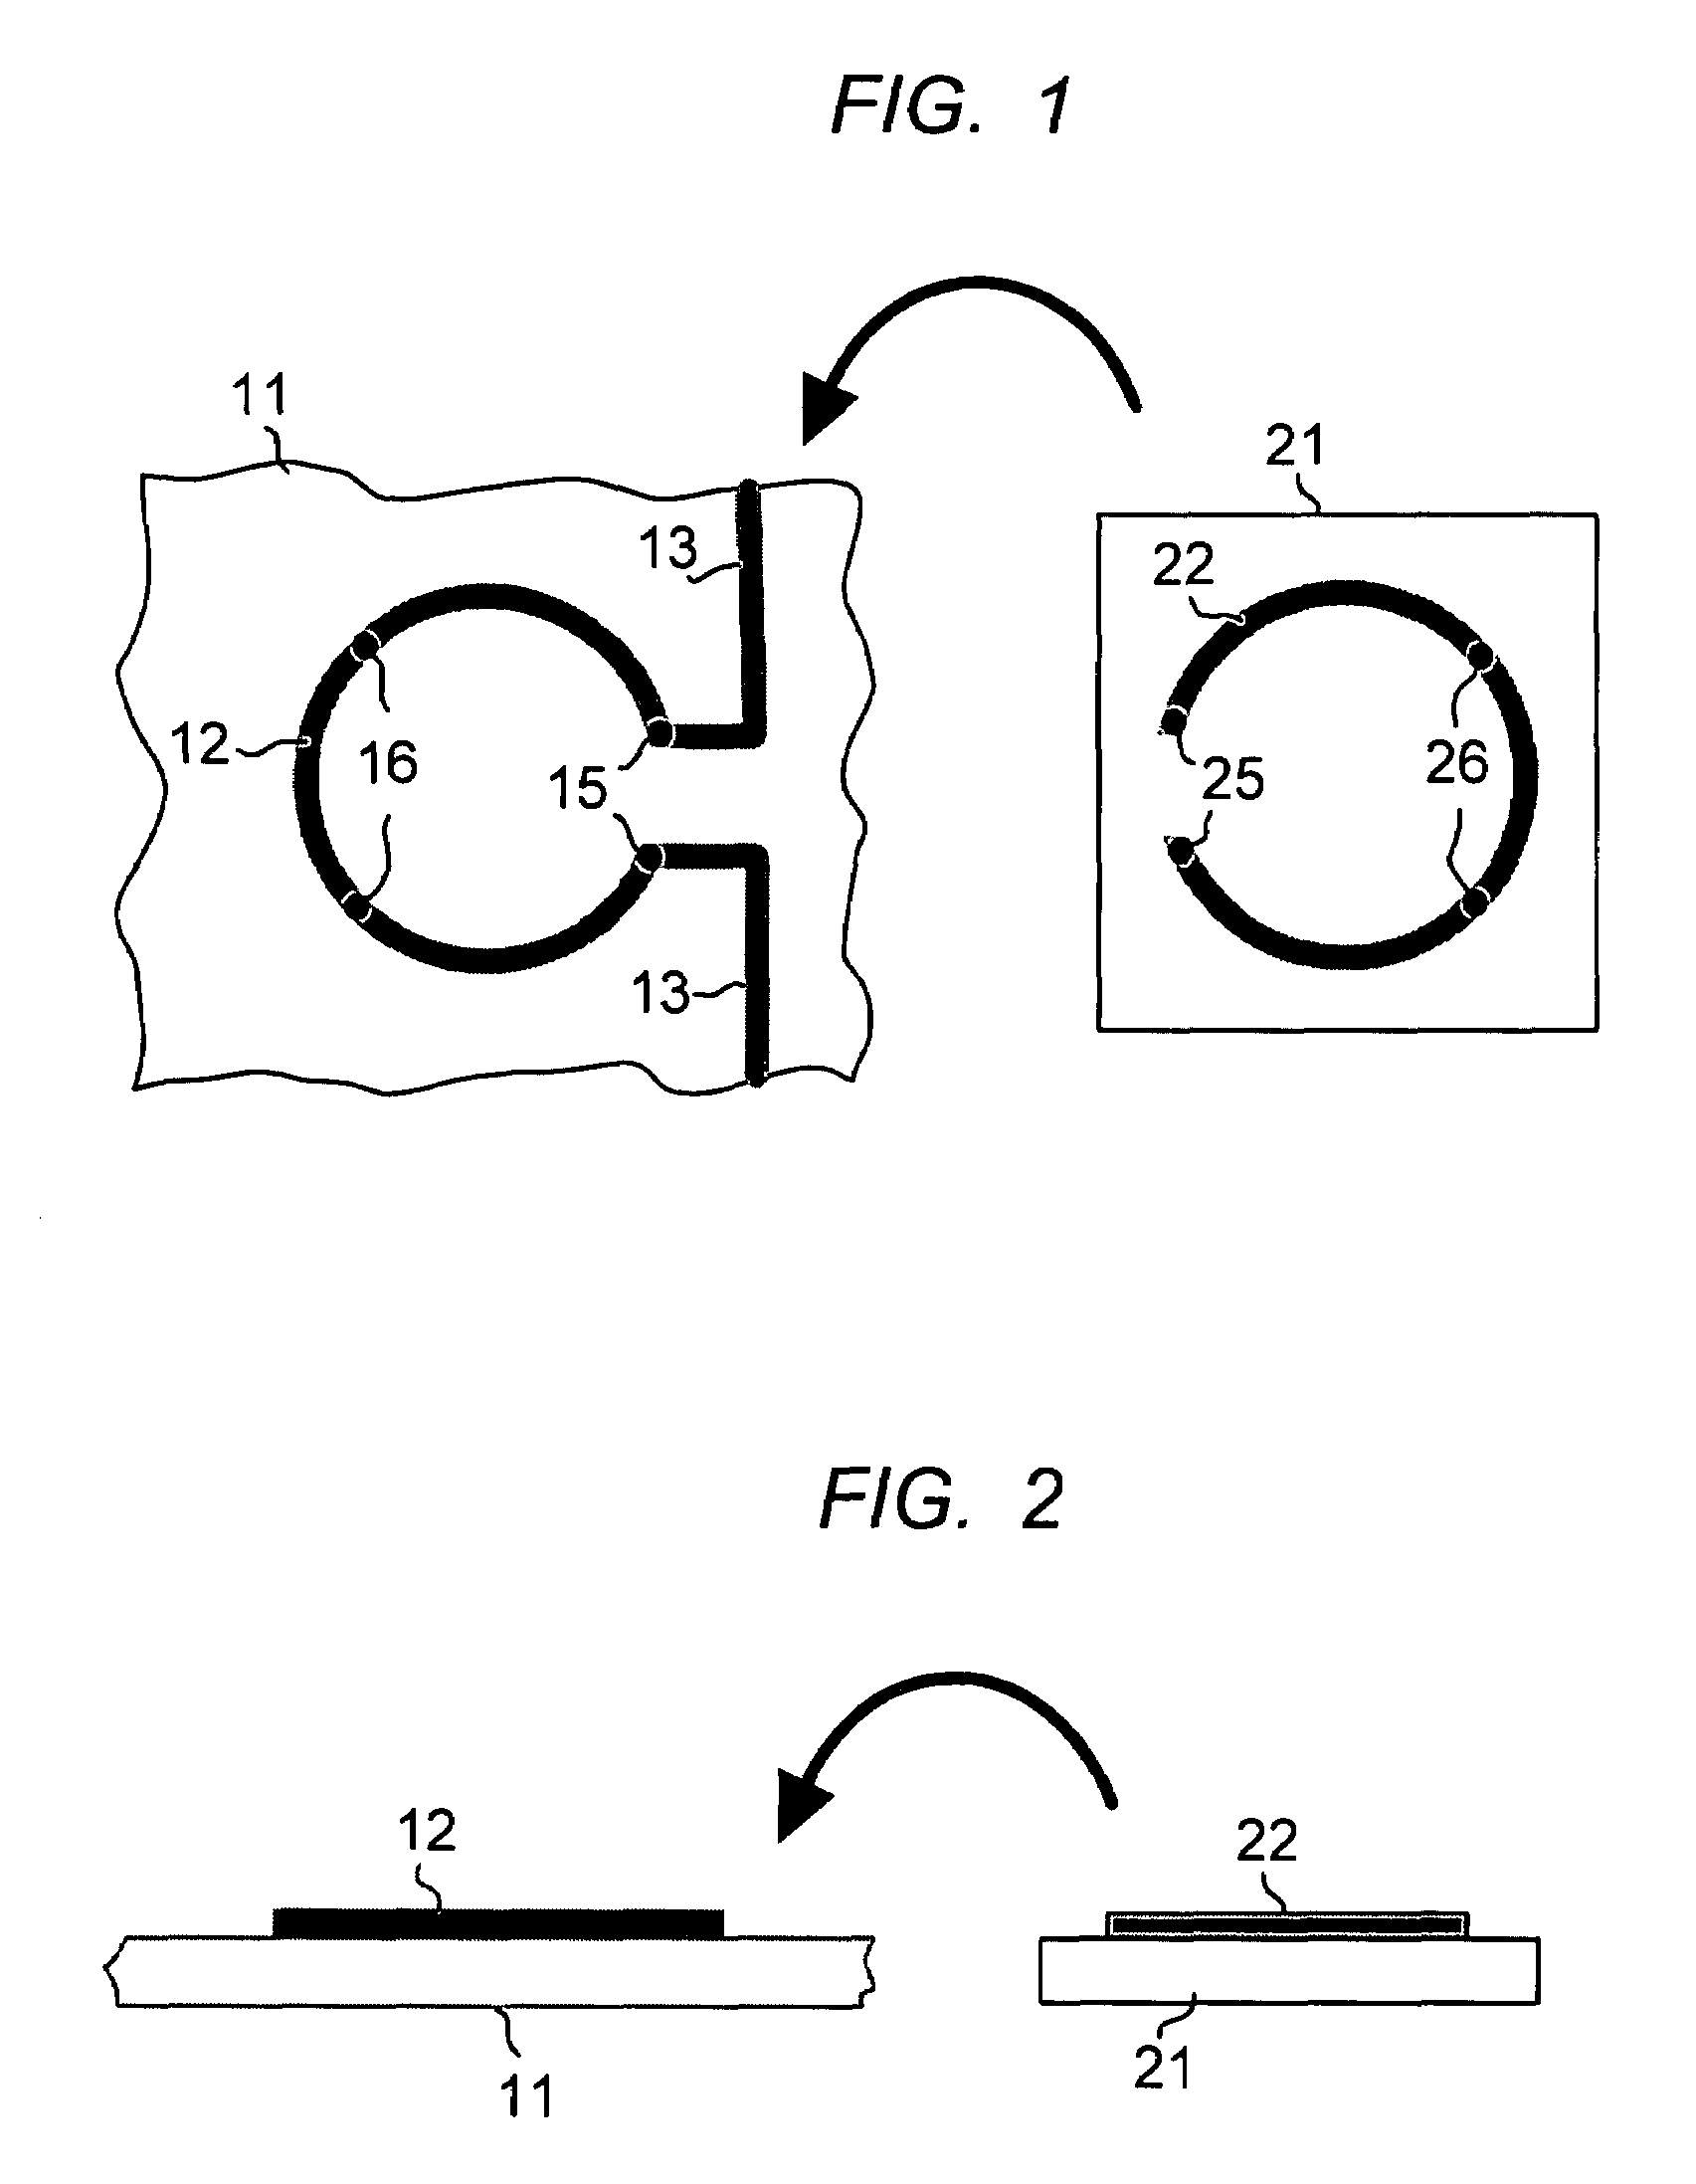 Integrated passive devices with high Q inductors